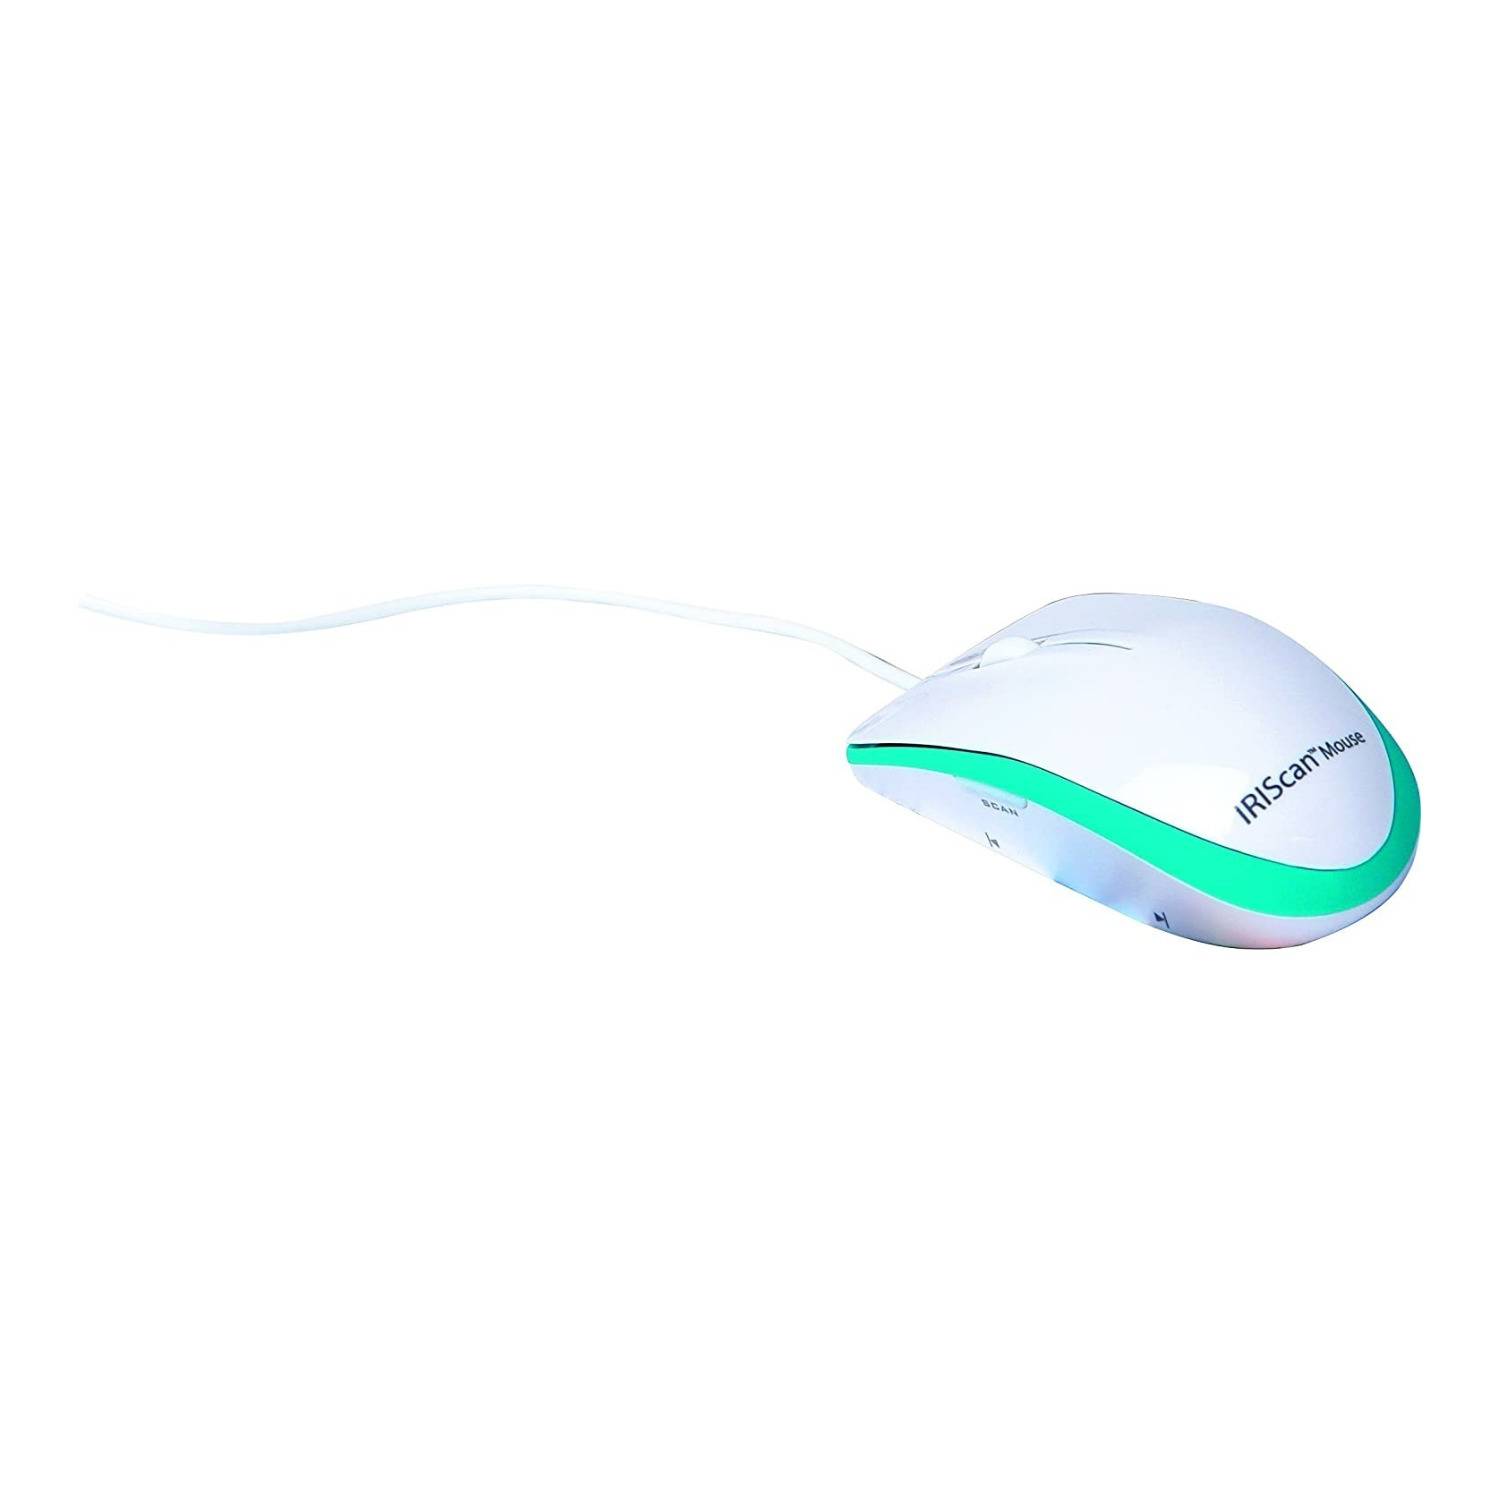 IRIS IRIScan Mouse Executive 2 All-In-One Scanner and Mouse